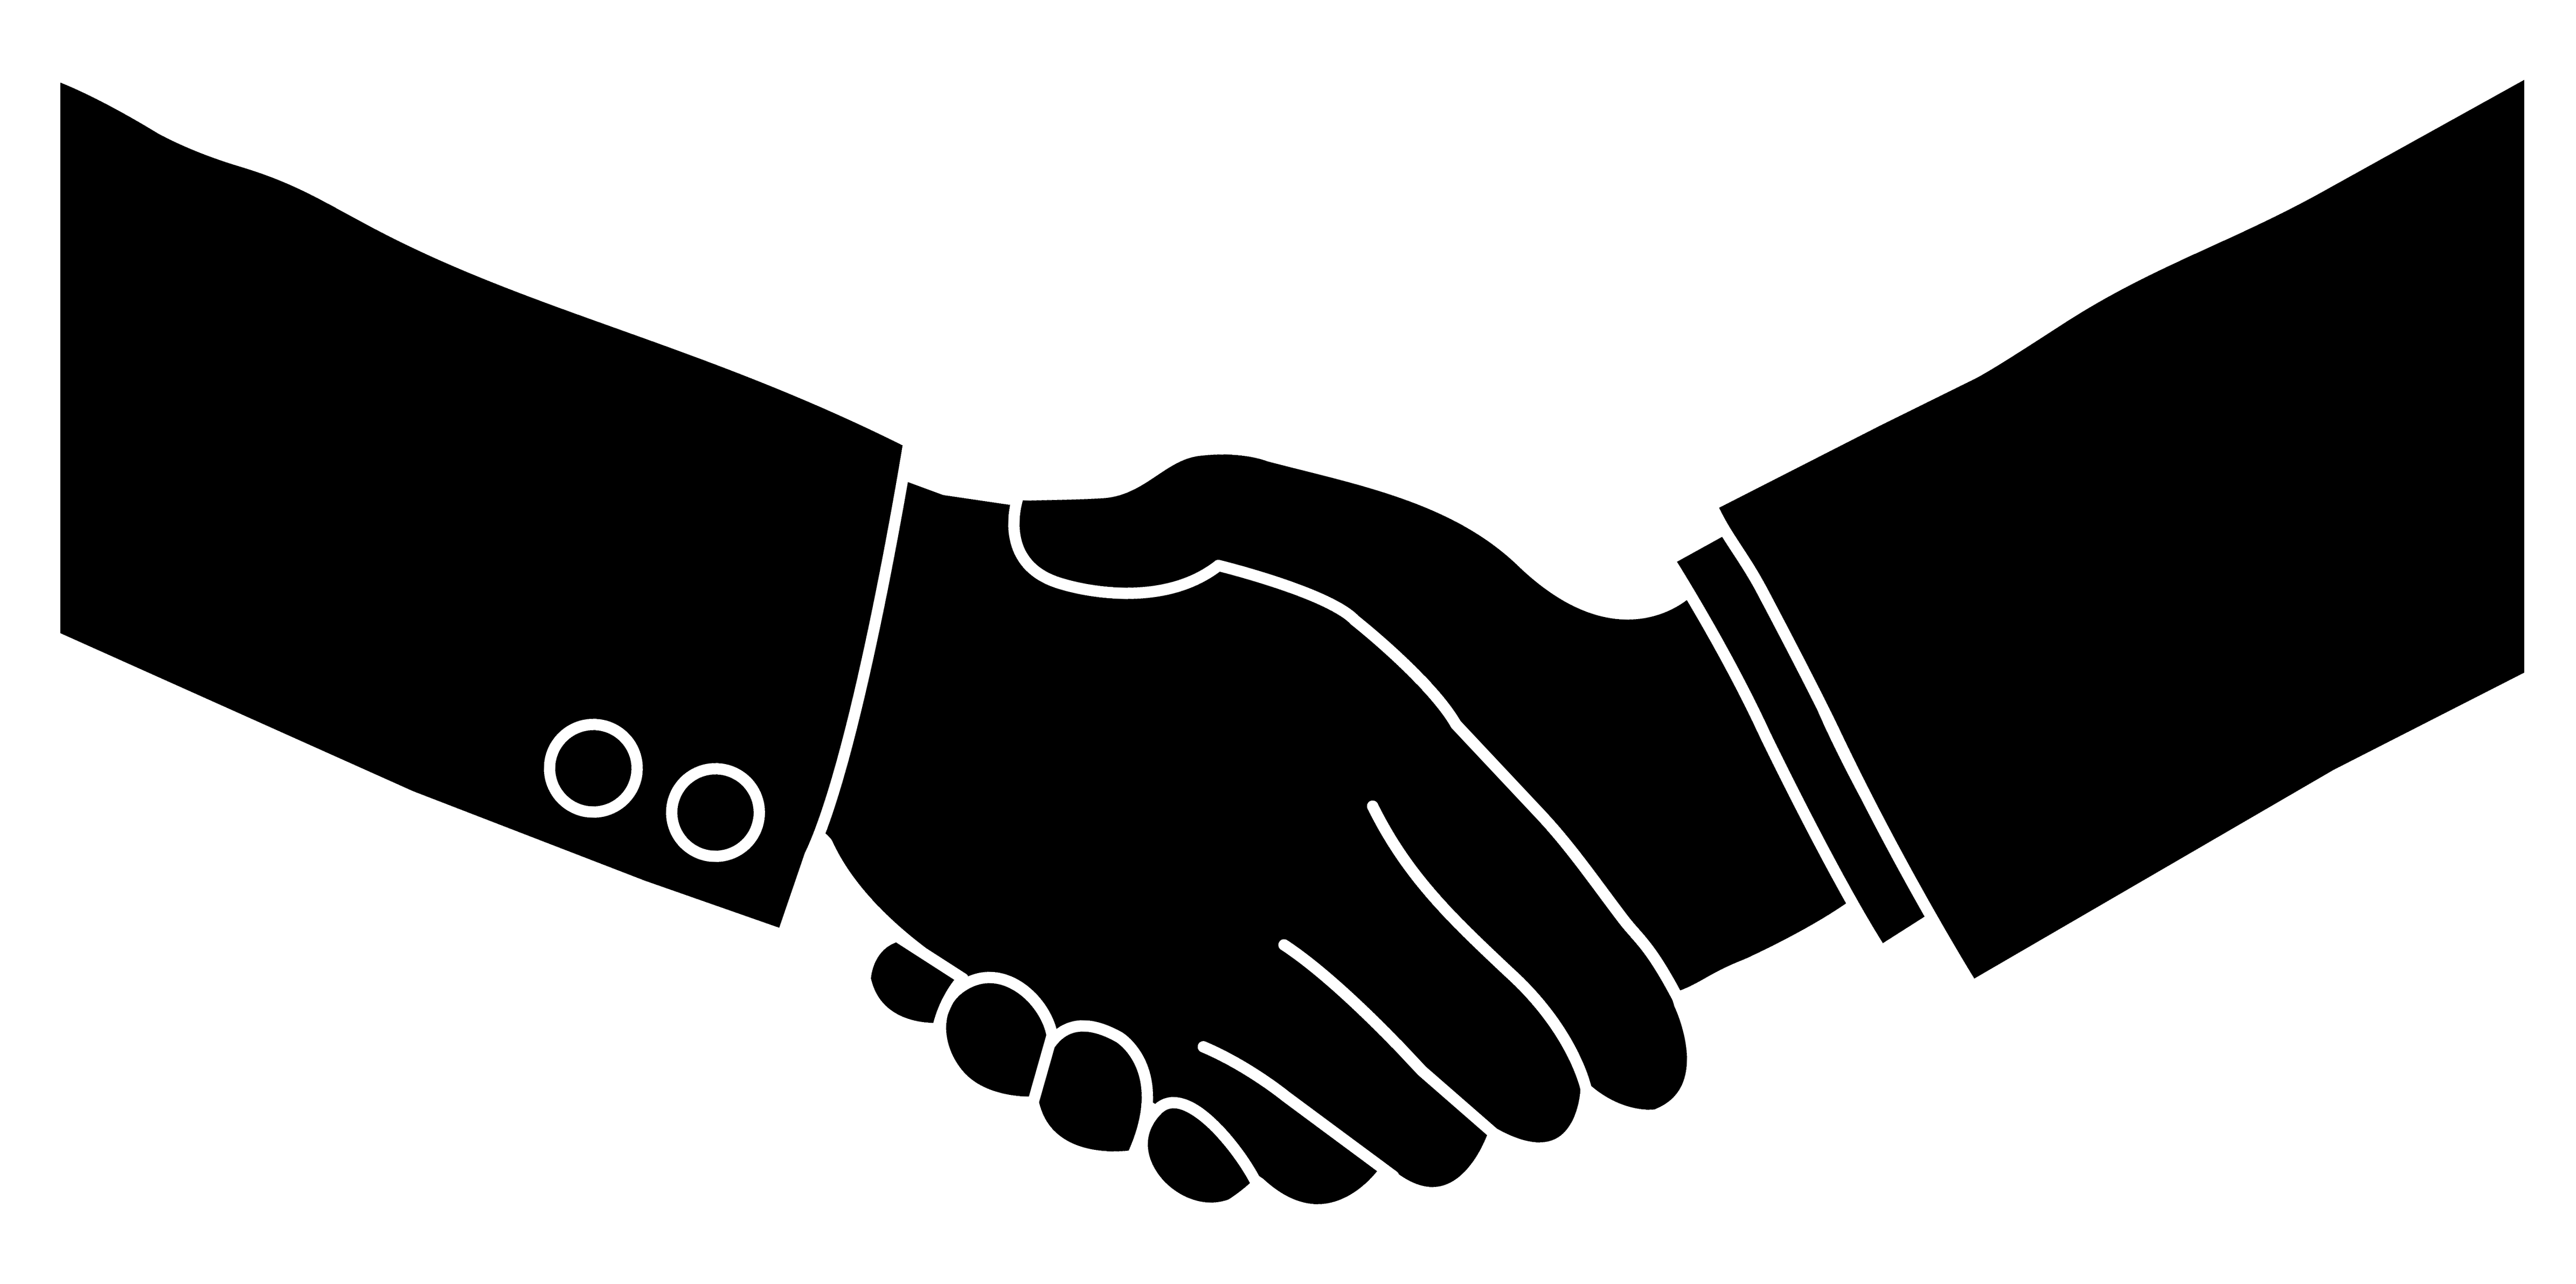 Shaking hands clip art.png | Clipart Panda - Free Clipart Images